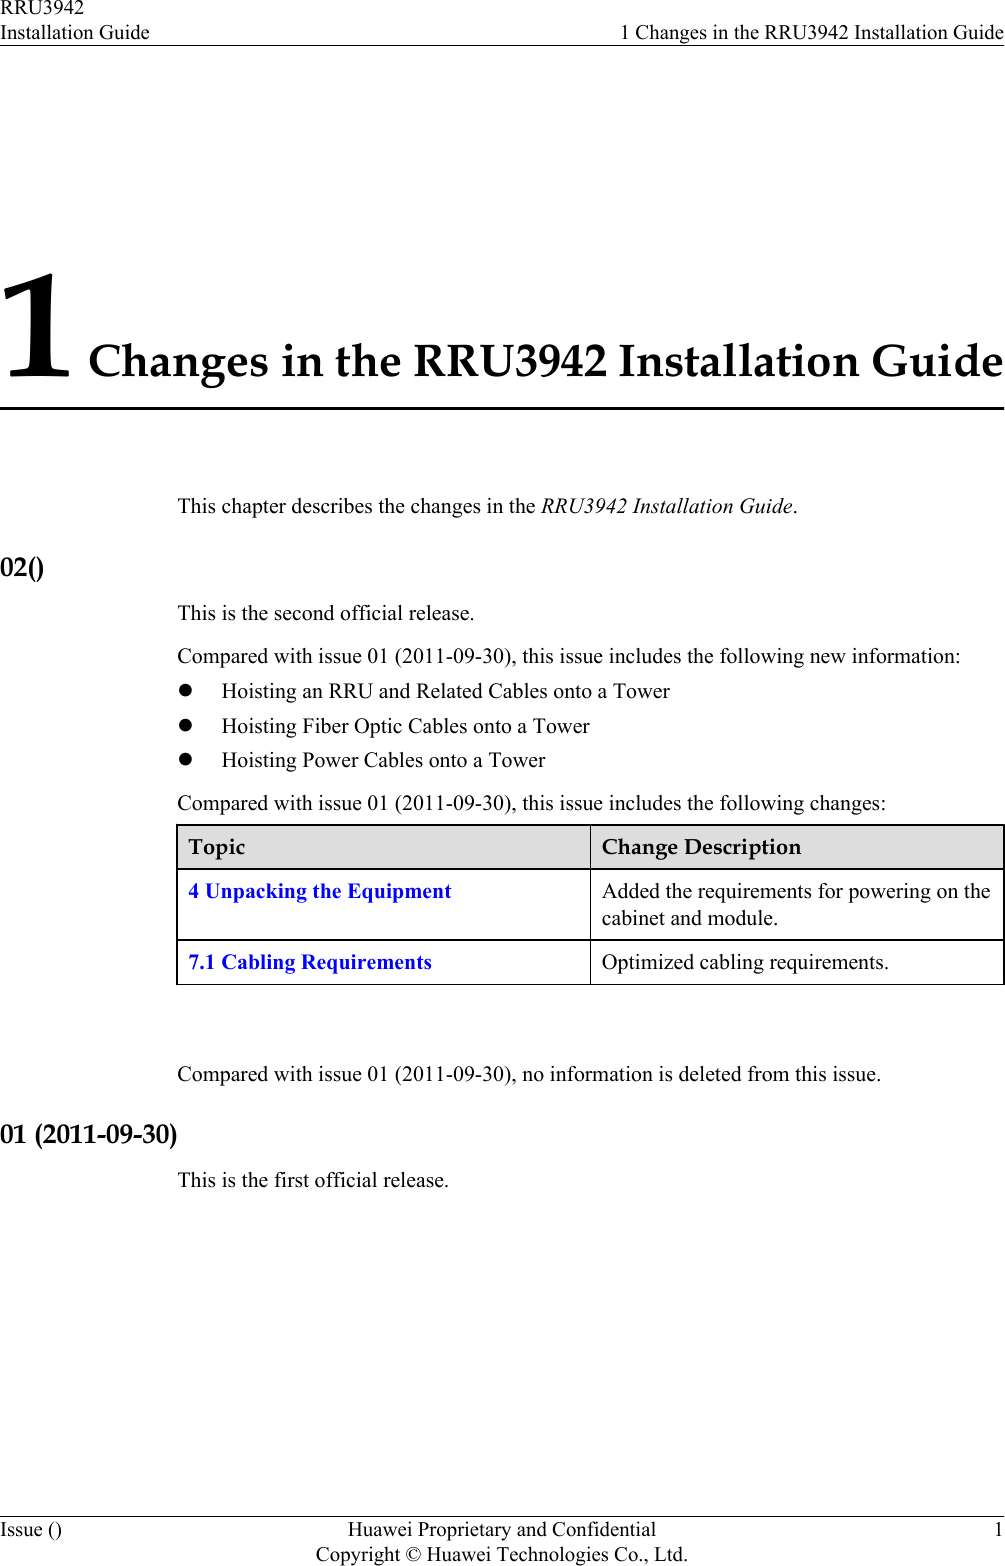 1 Changes in the RRU3942 Installation GuideThis chapter describes the changes in the RRU3942 Installation Guide.02()This is the second official release.Compared with issue 01 (2011-09-30), this issue includes the following new information:lHoisting an RRU and Related Cables onto a TowerlHoisting Fiber Optic Cables onto a TowerlHoisting Power Cables onto a TowerCompared with issue 01 (2011-09-30), this issue includes the following changes:Topic Change Description4 Unpacking the Equipment Added the requirements for powering on thecabinet and module.7.1 Cabling Requirements Optimized cabling requirements. Compared with issue 01 (2011-09-30), no information is deleted from this issue.01 (2011-09-30)This is the first official release.RRU3942Installation Guide 1 Changes in the RRU3942 Installation GuideIssue () Huawei Proprietary and ConfidentialCopyright © Huawei Technologies Co., Ltd.1